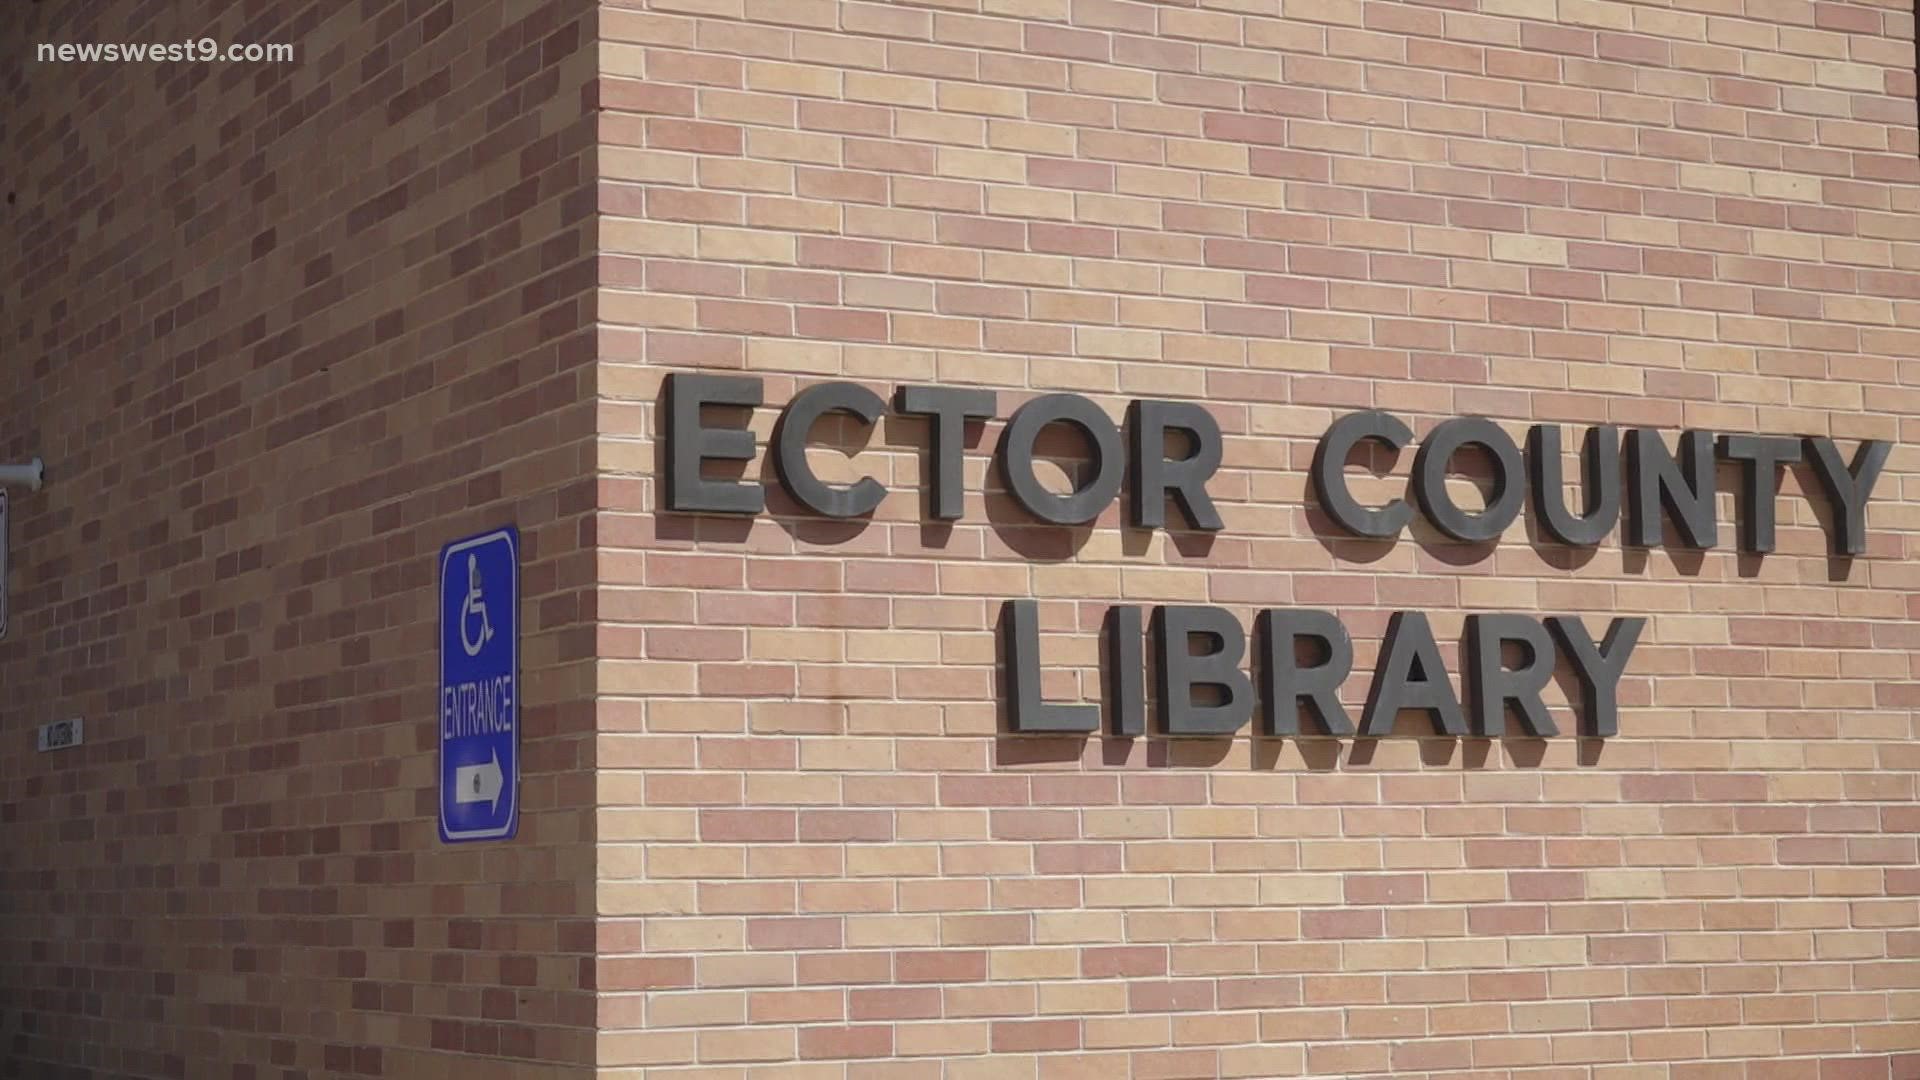 If approved, Ector County could bring in an outside firm to help them make decisions regarding the library.